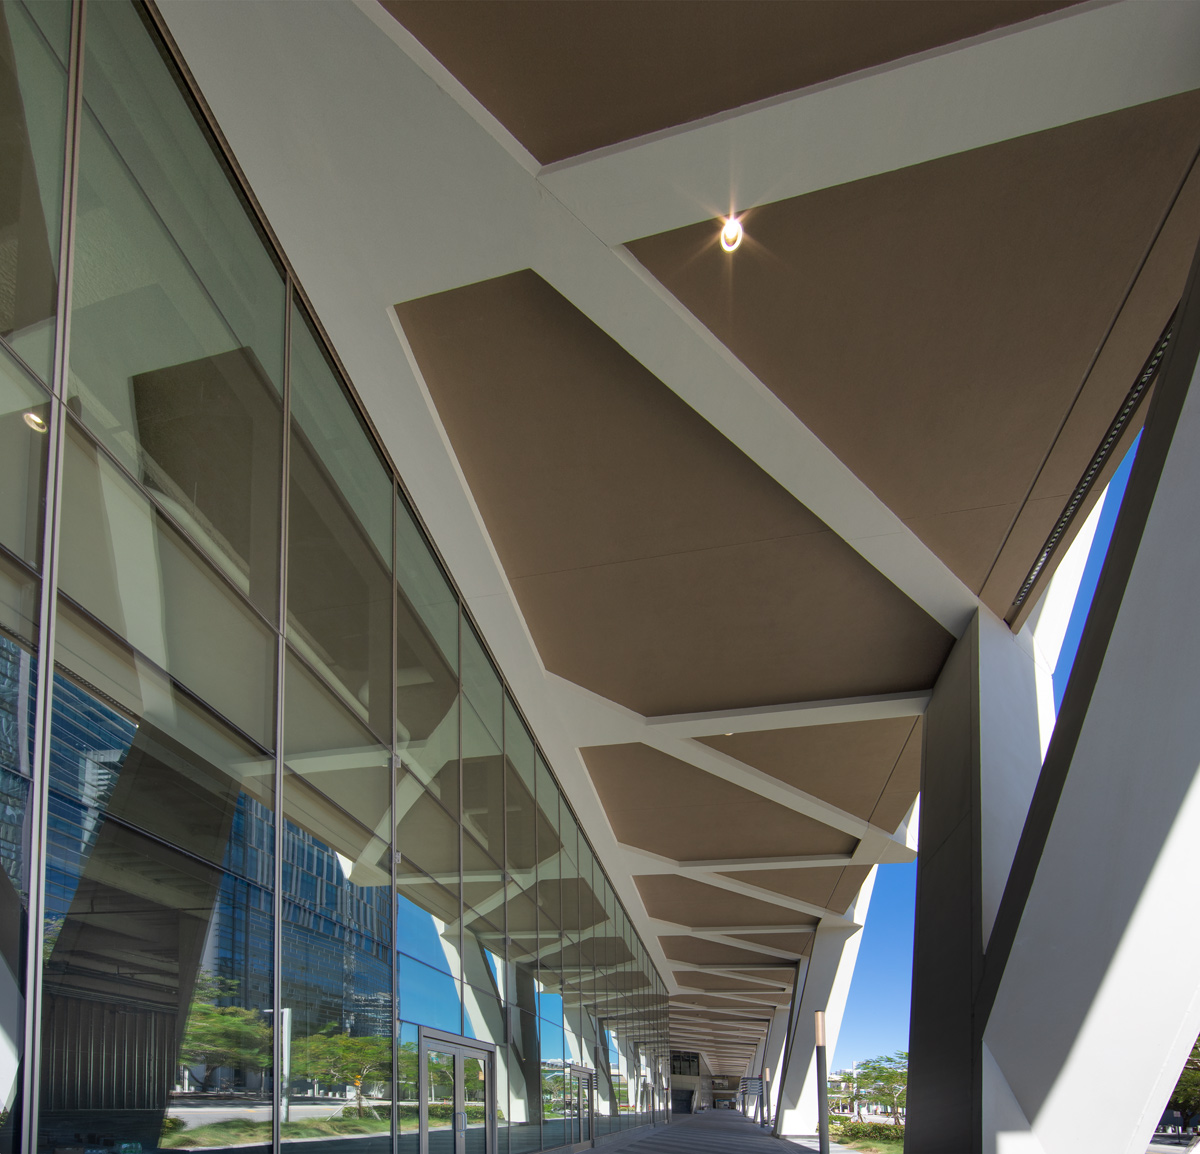 Architectural detail of the Brightline Miami Central terminal entrance.